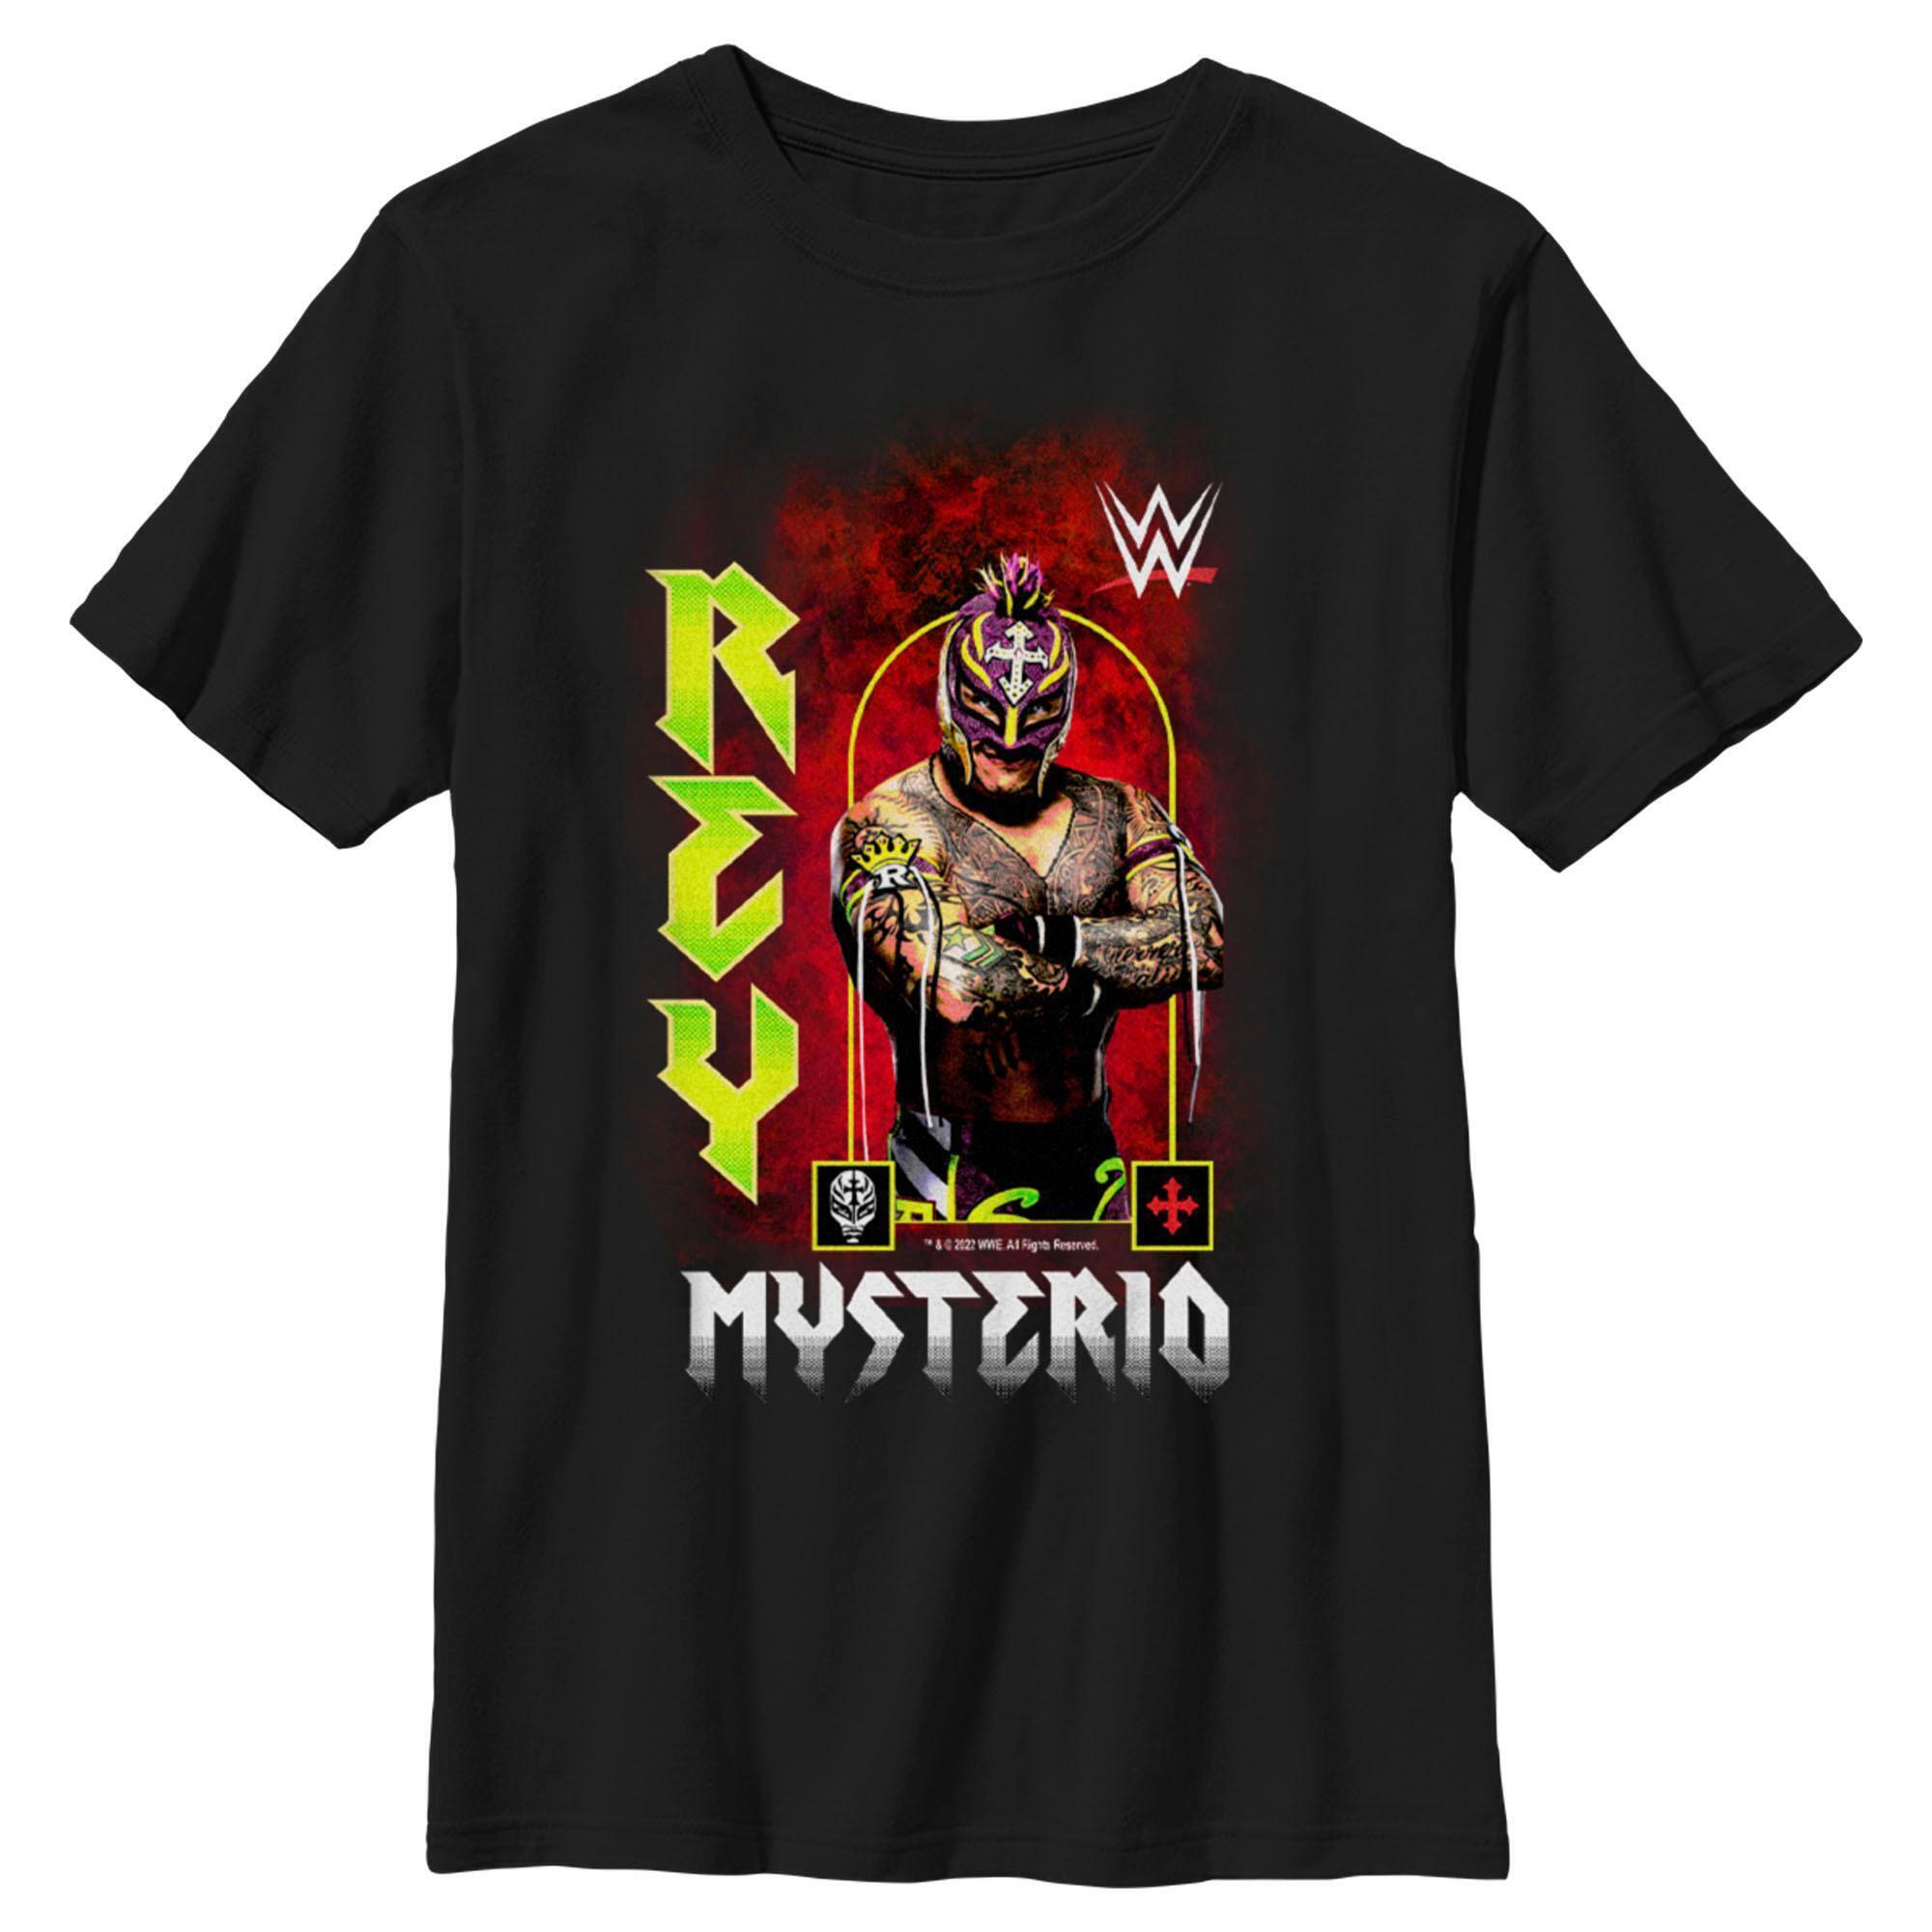 Boy's WWE Rey Mysterio Poster Graphic T-Shirt